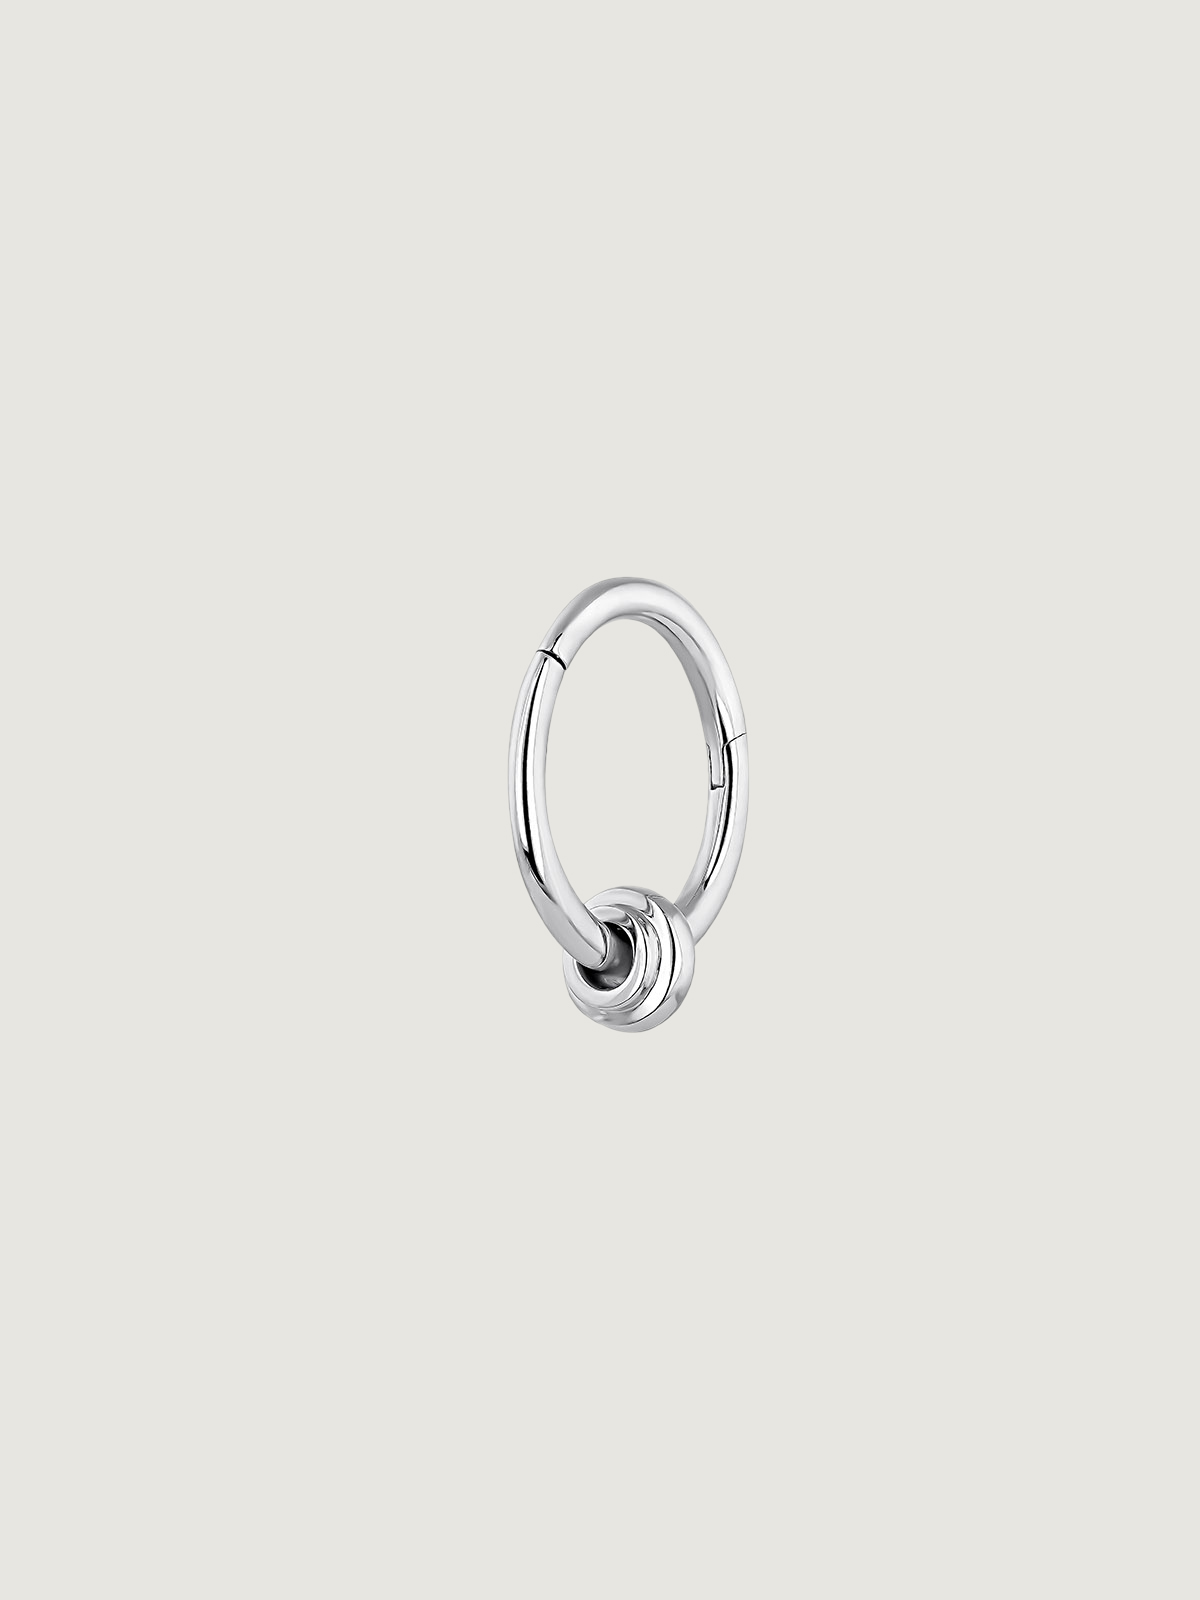 Individual 9K white gold hoop earring with small ball.